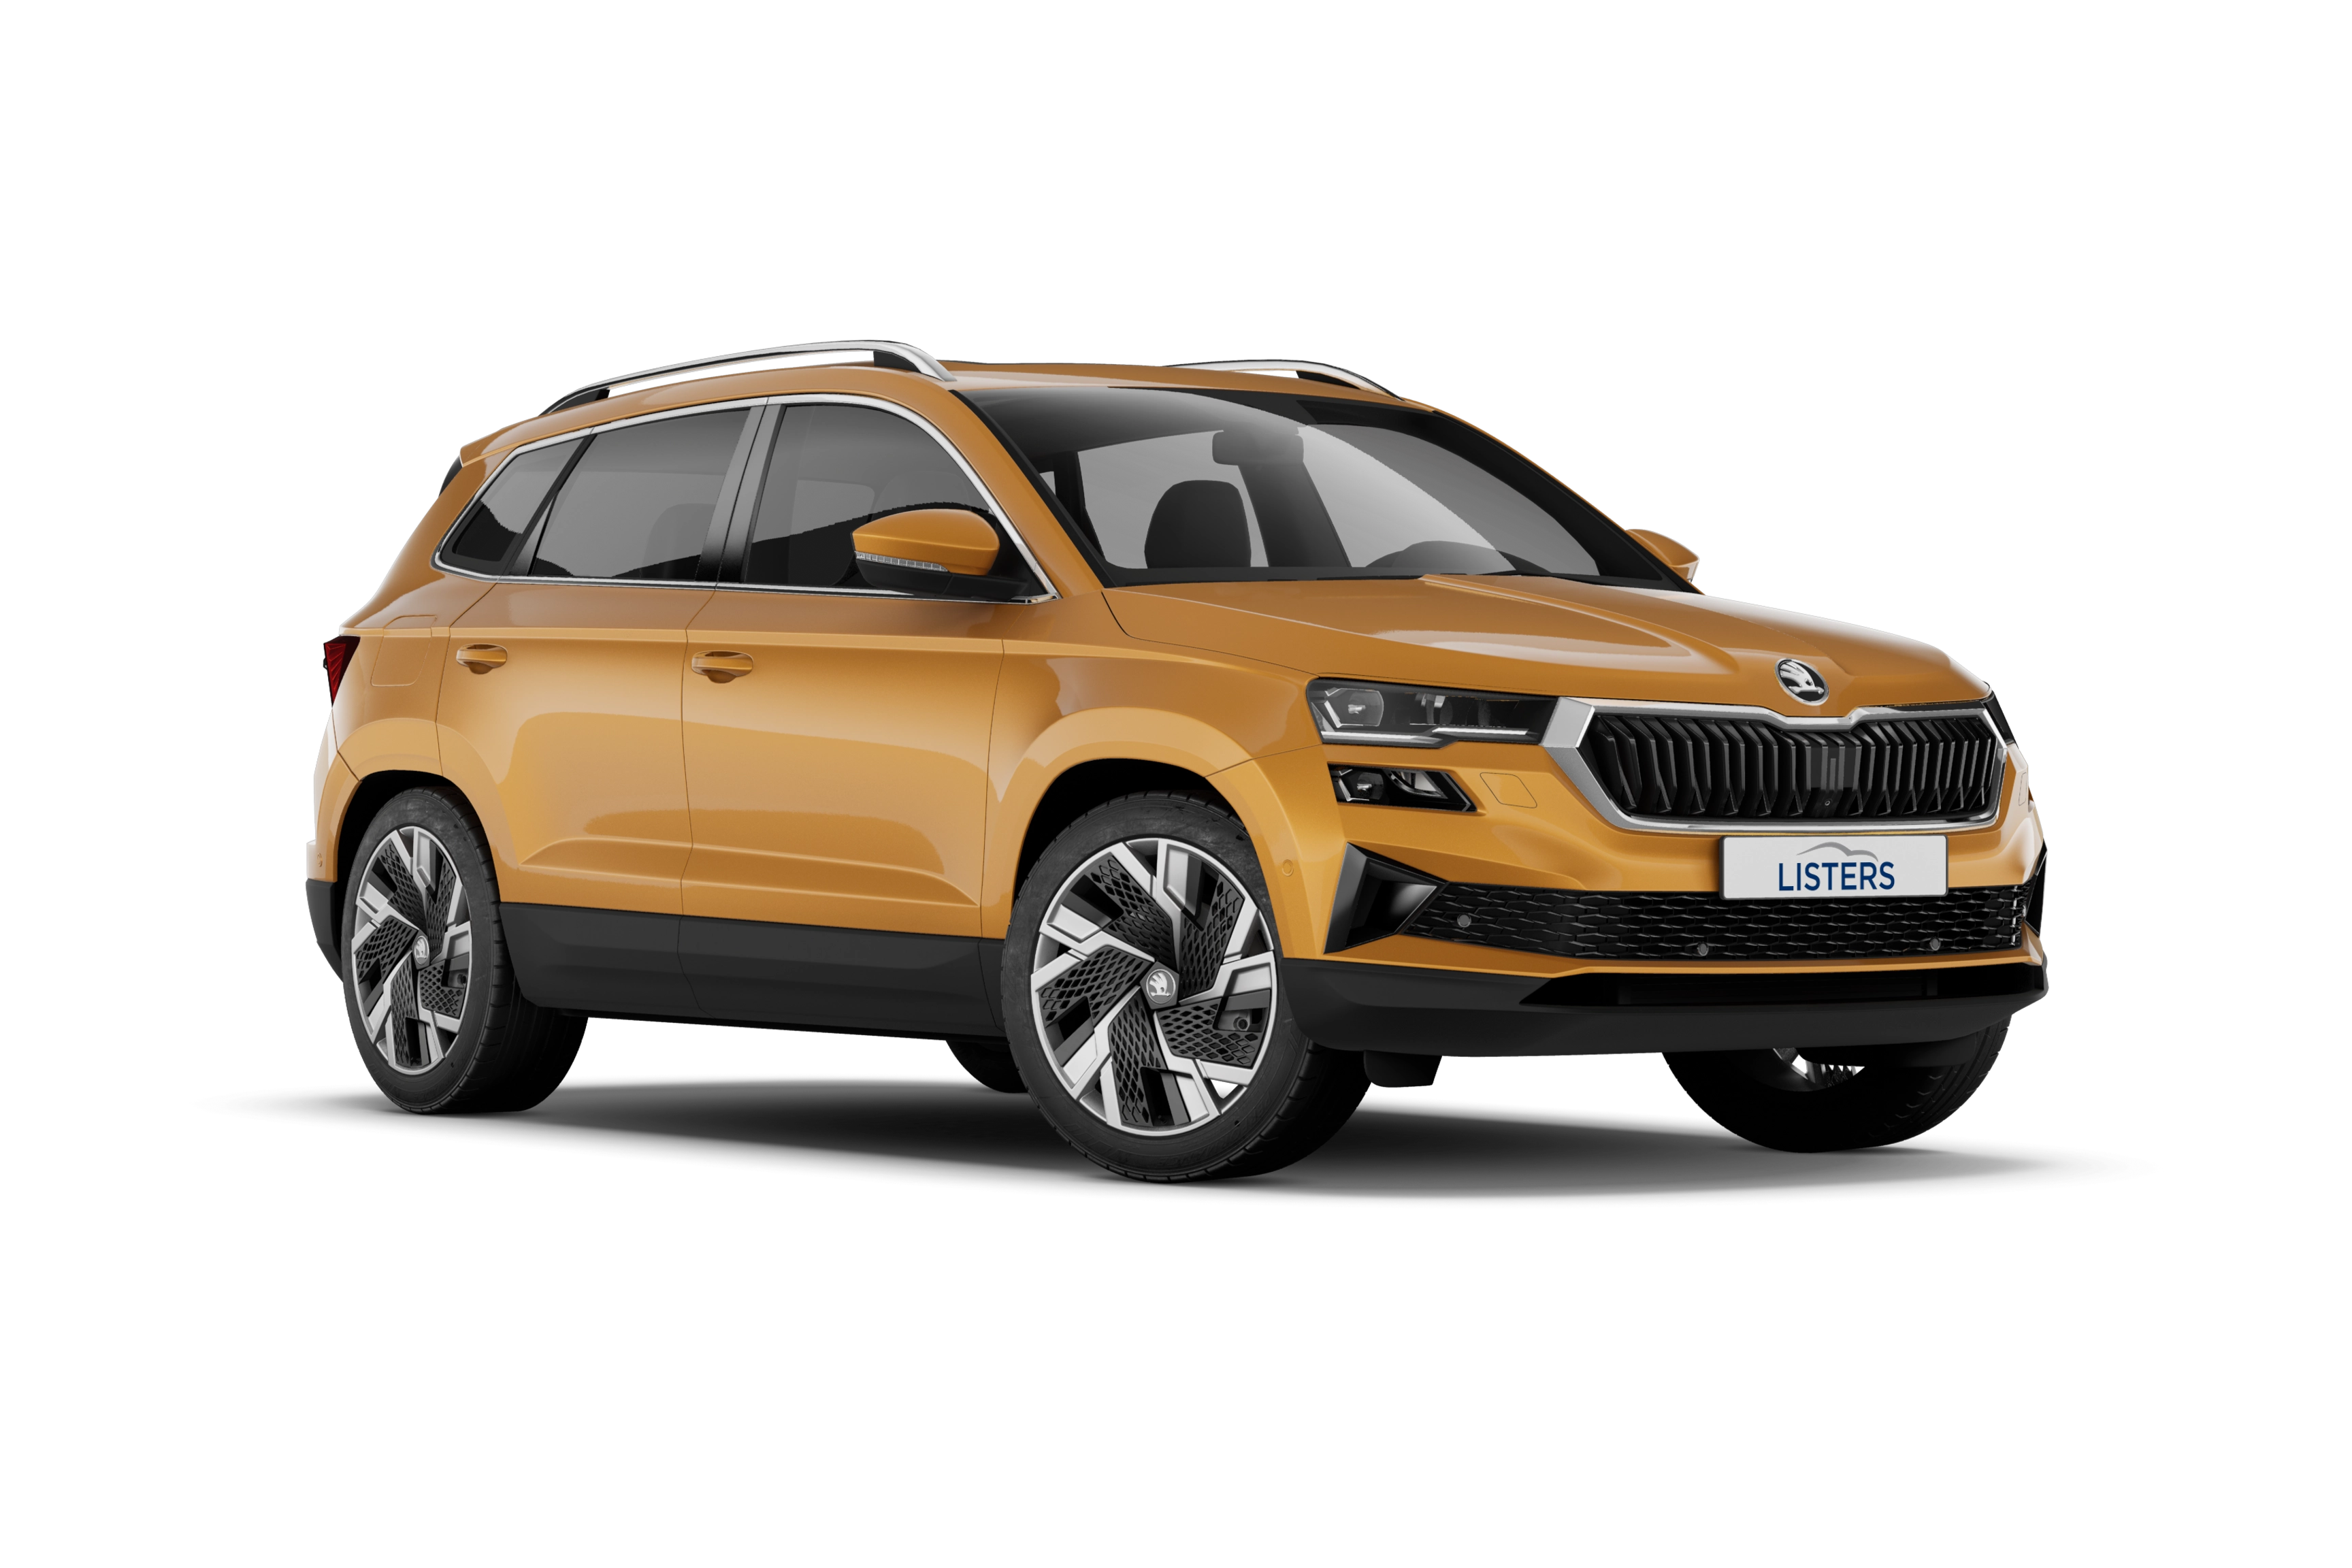 Skoda Karoq Contract Hire & Leasing Offers